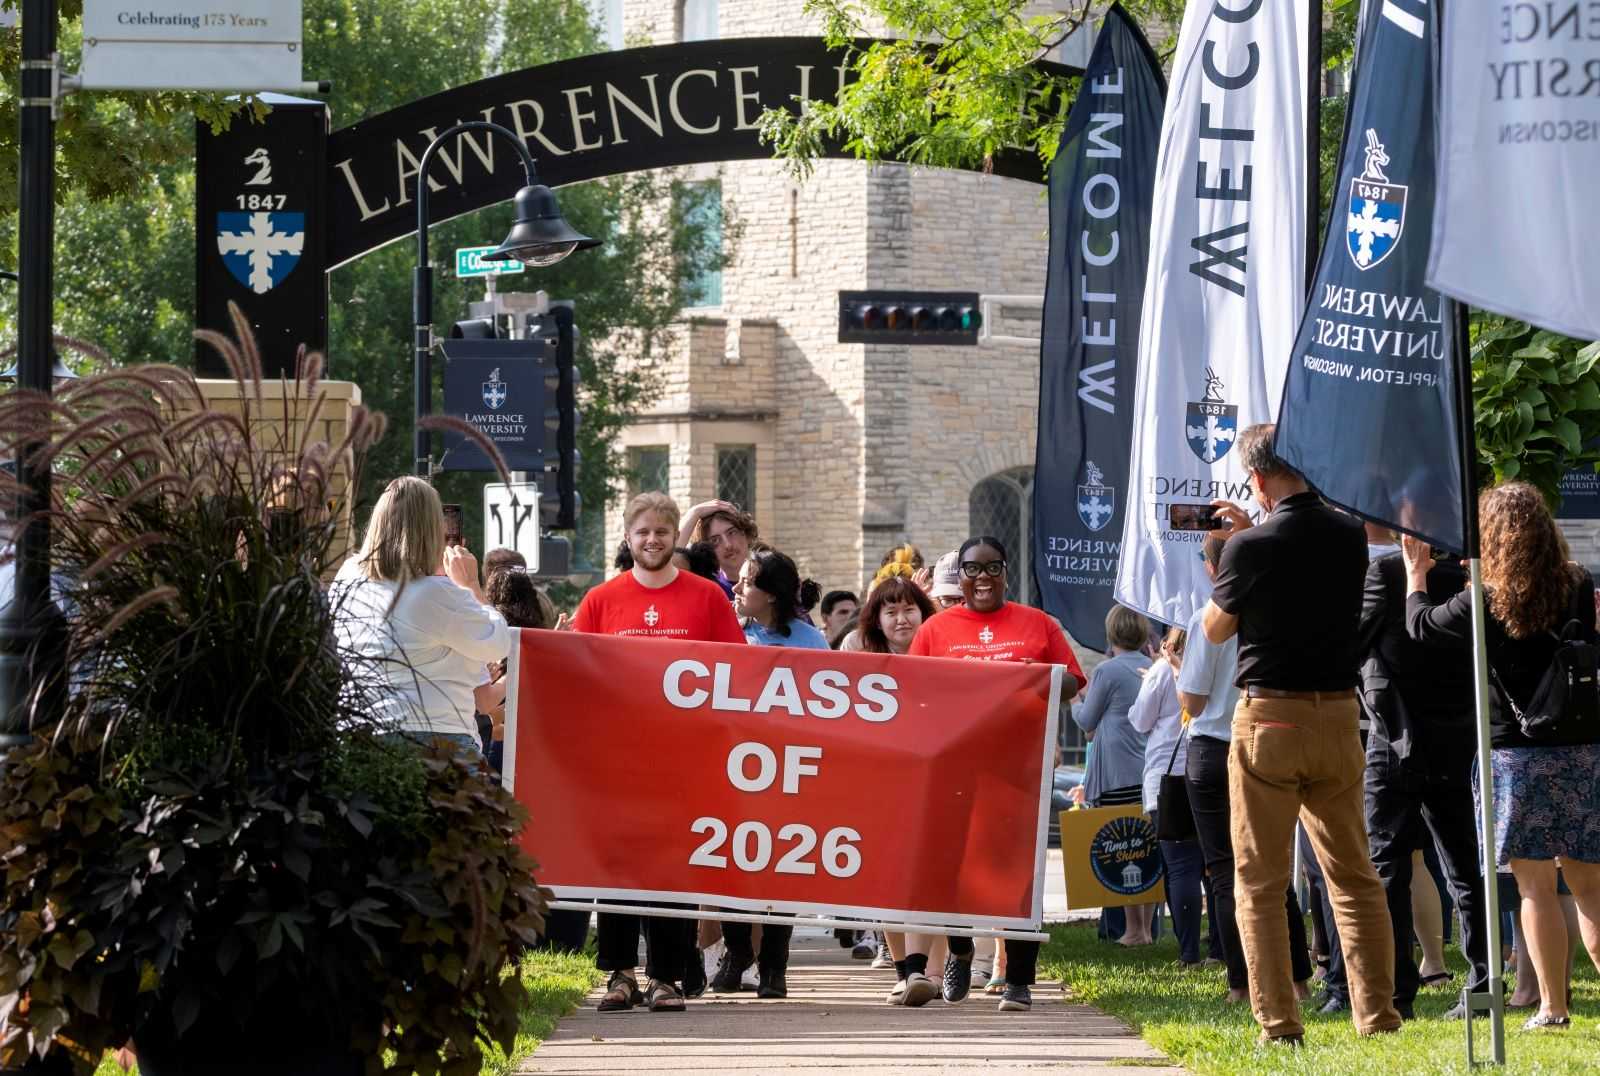 Incoming students carry the red Class of 2026 flag as they lead the processional under the arch.